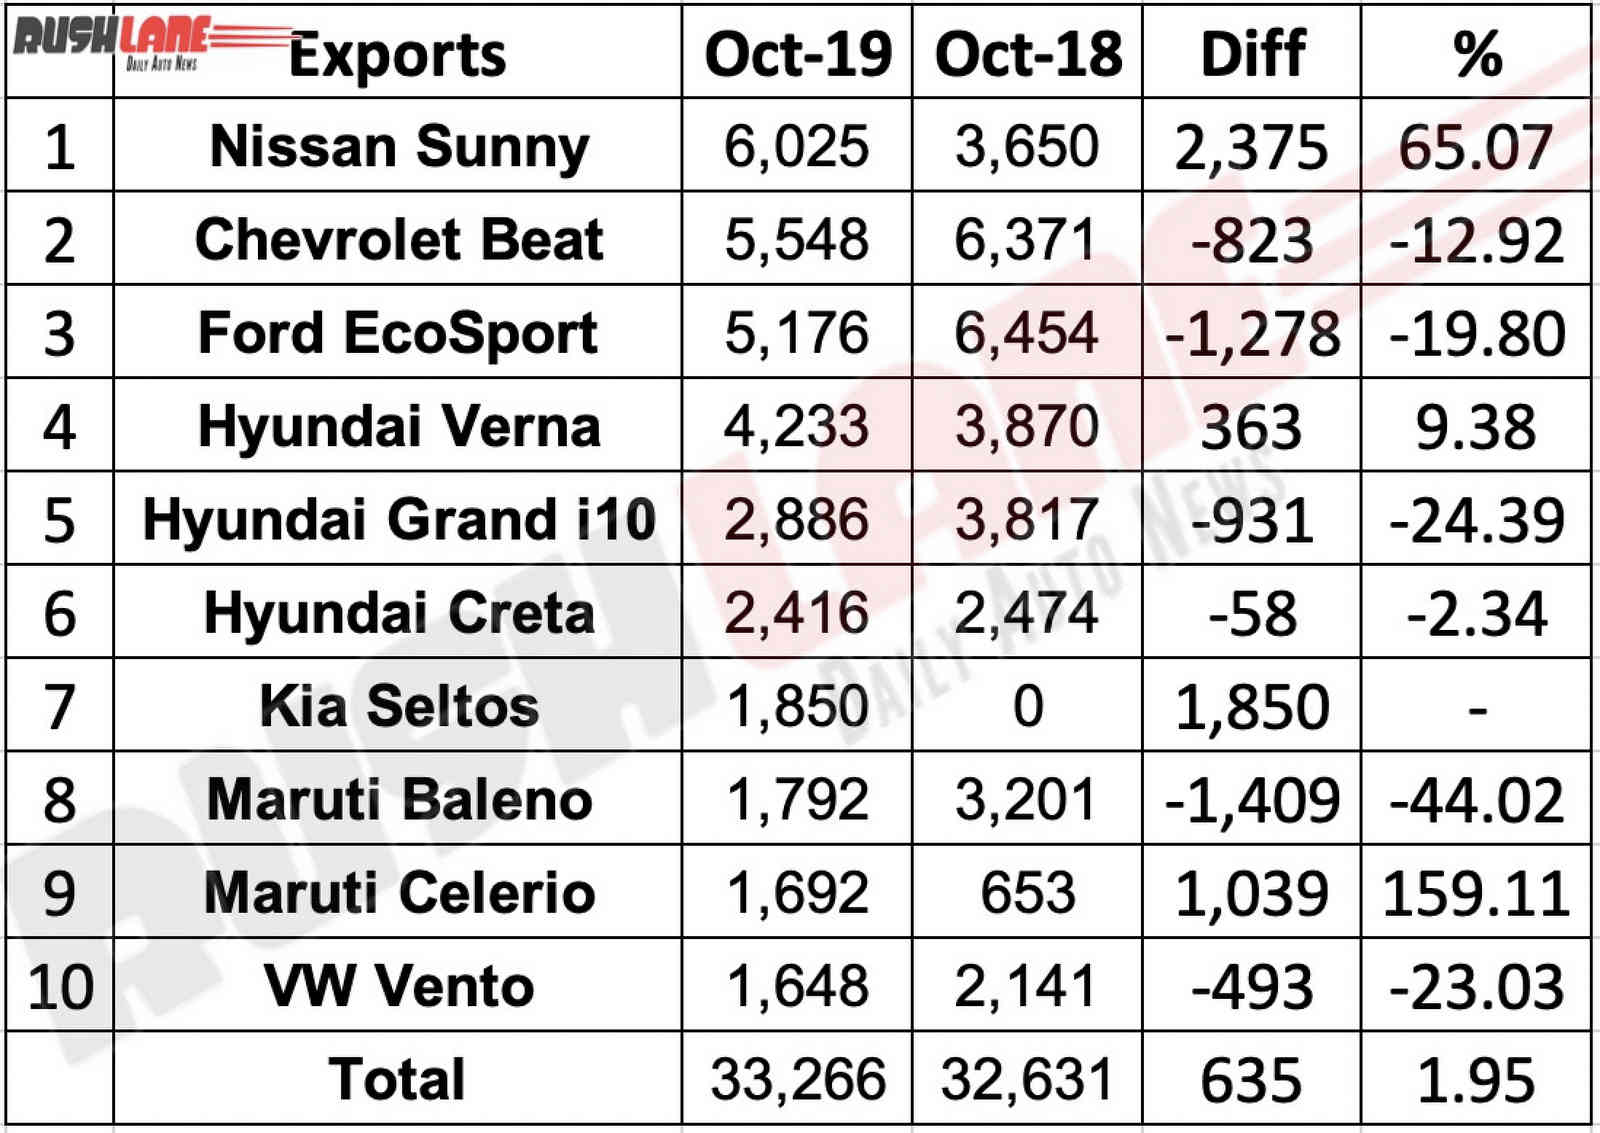 Top 10 cars exported from India Oct 2019